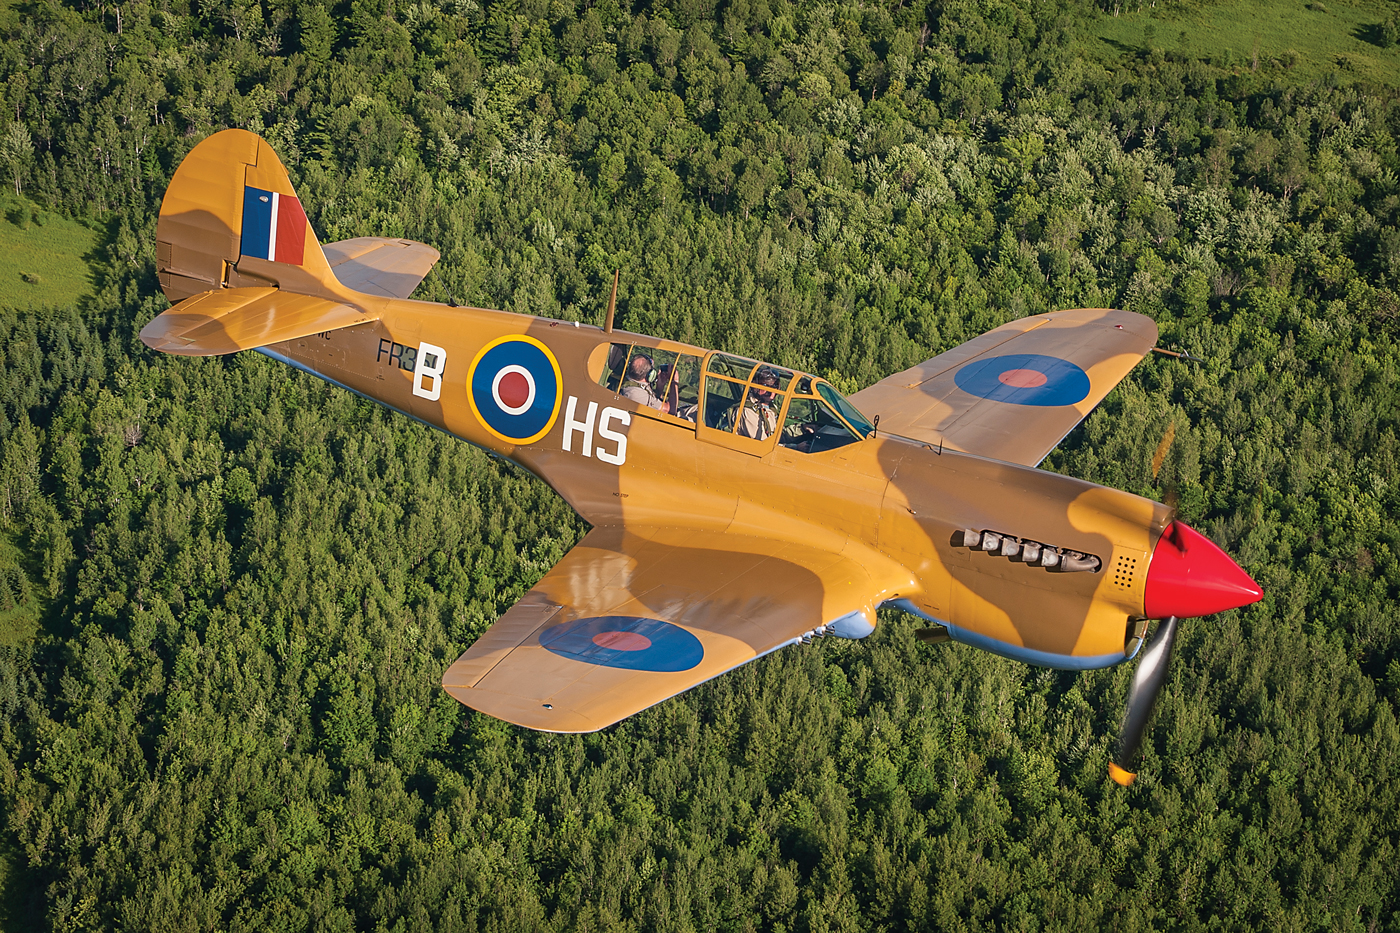 Vintage Wings of Canada’s “W/C Stocky Edwards P-40N Curtiss Kittyhawk” is painted in the same Desert Air Force markings of Wing Commander James “Stocky” Edwards’ North Africa-based 260 Squadron (RAF). In this photo, pilot Dave Hadfield soars over the Gatineau Hills with his father, Roger, on board. PHOTO: Peter Handley, Vintage Wings of Canada